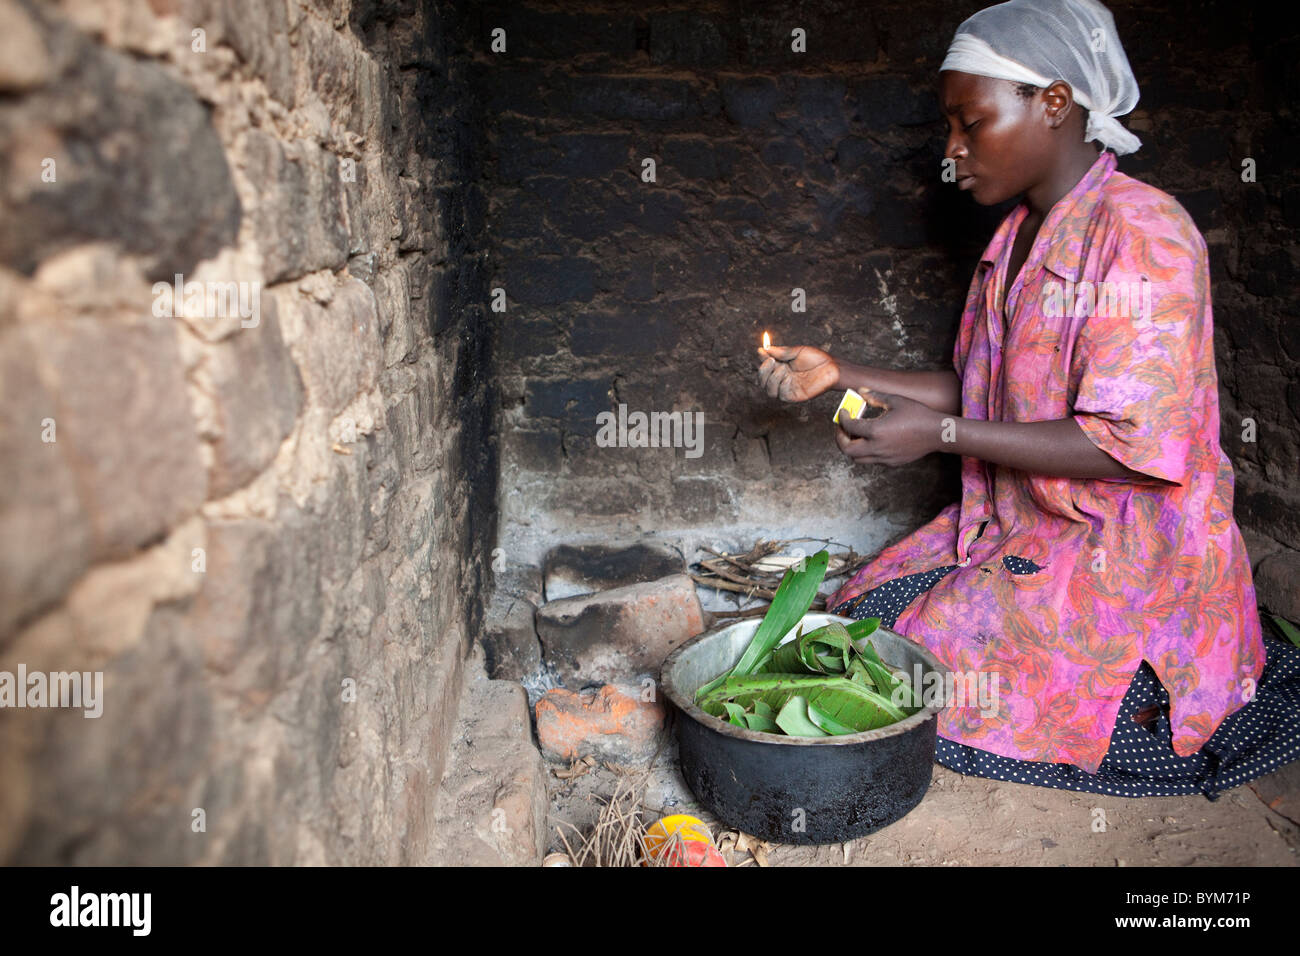 A woman prepares a meal of bananas for her family in rural Masaka, Uganda, East Africa. Stock Photo